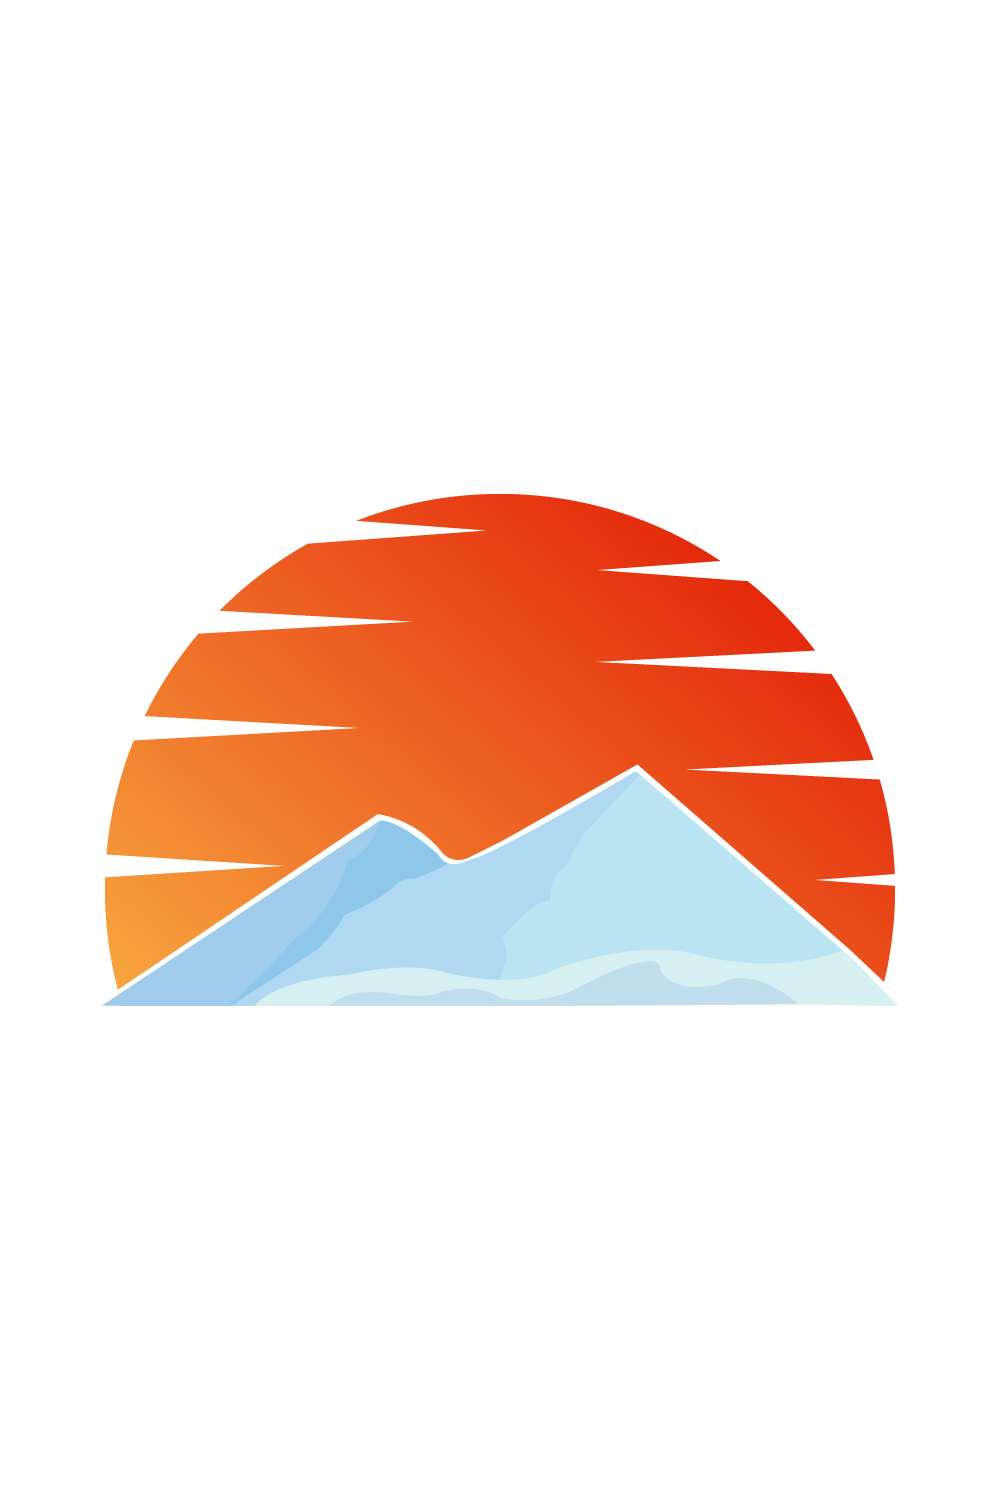 Himalaya logo design vector images Mountain logo design With sun and clouds above it landscapes logo design pinterest preview image.